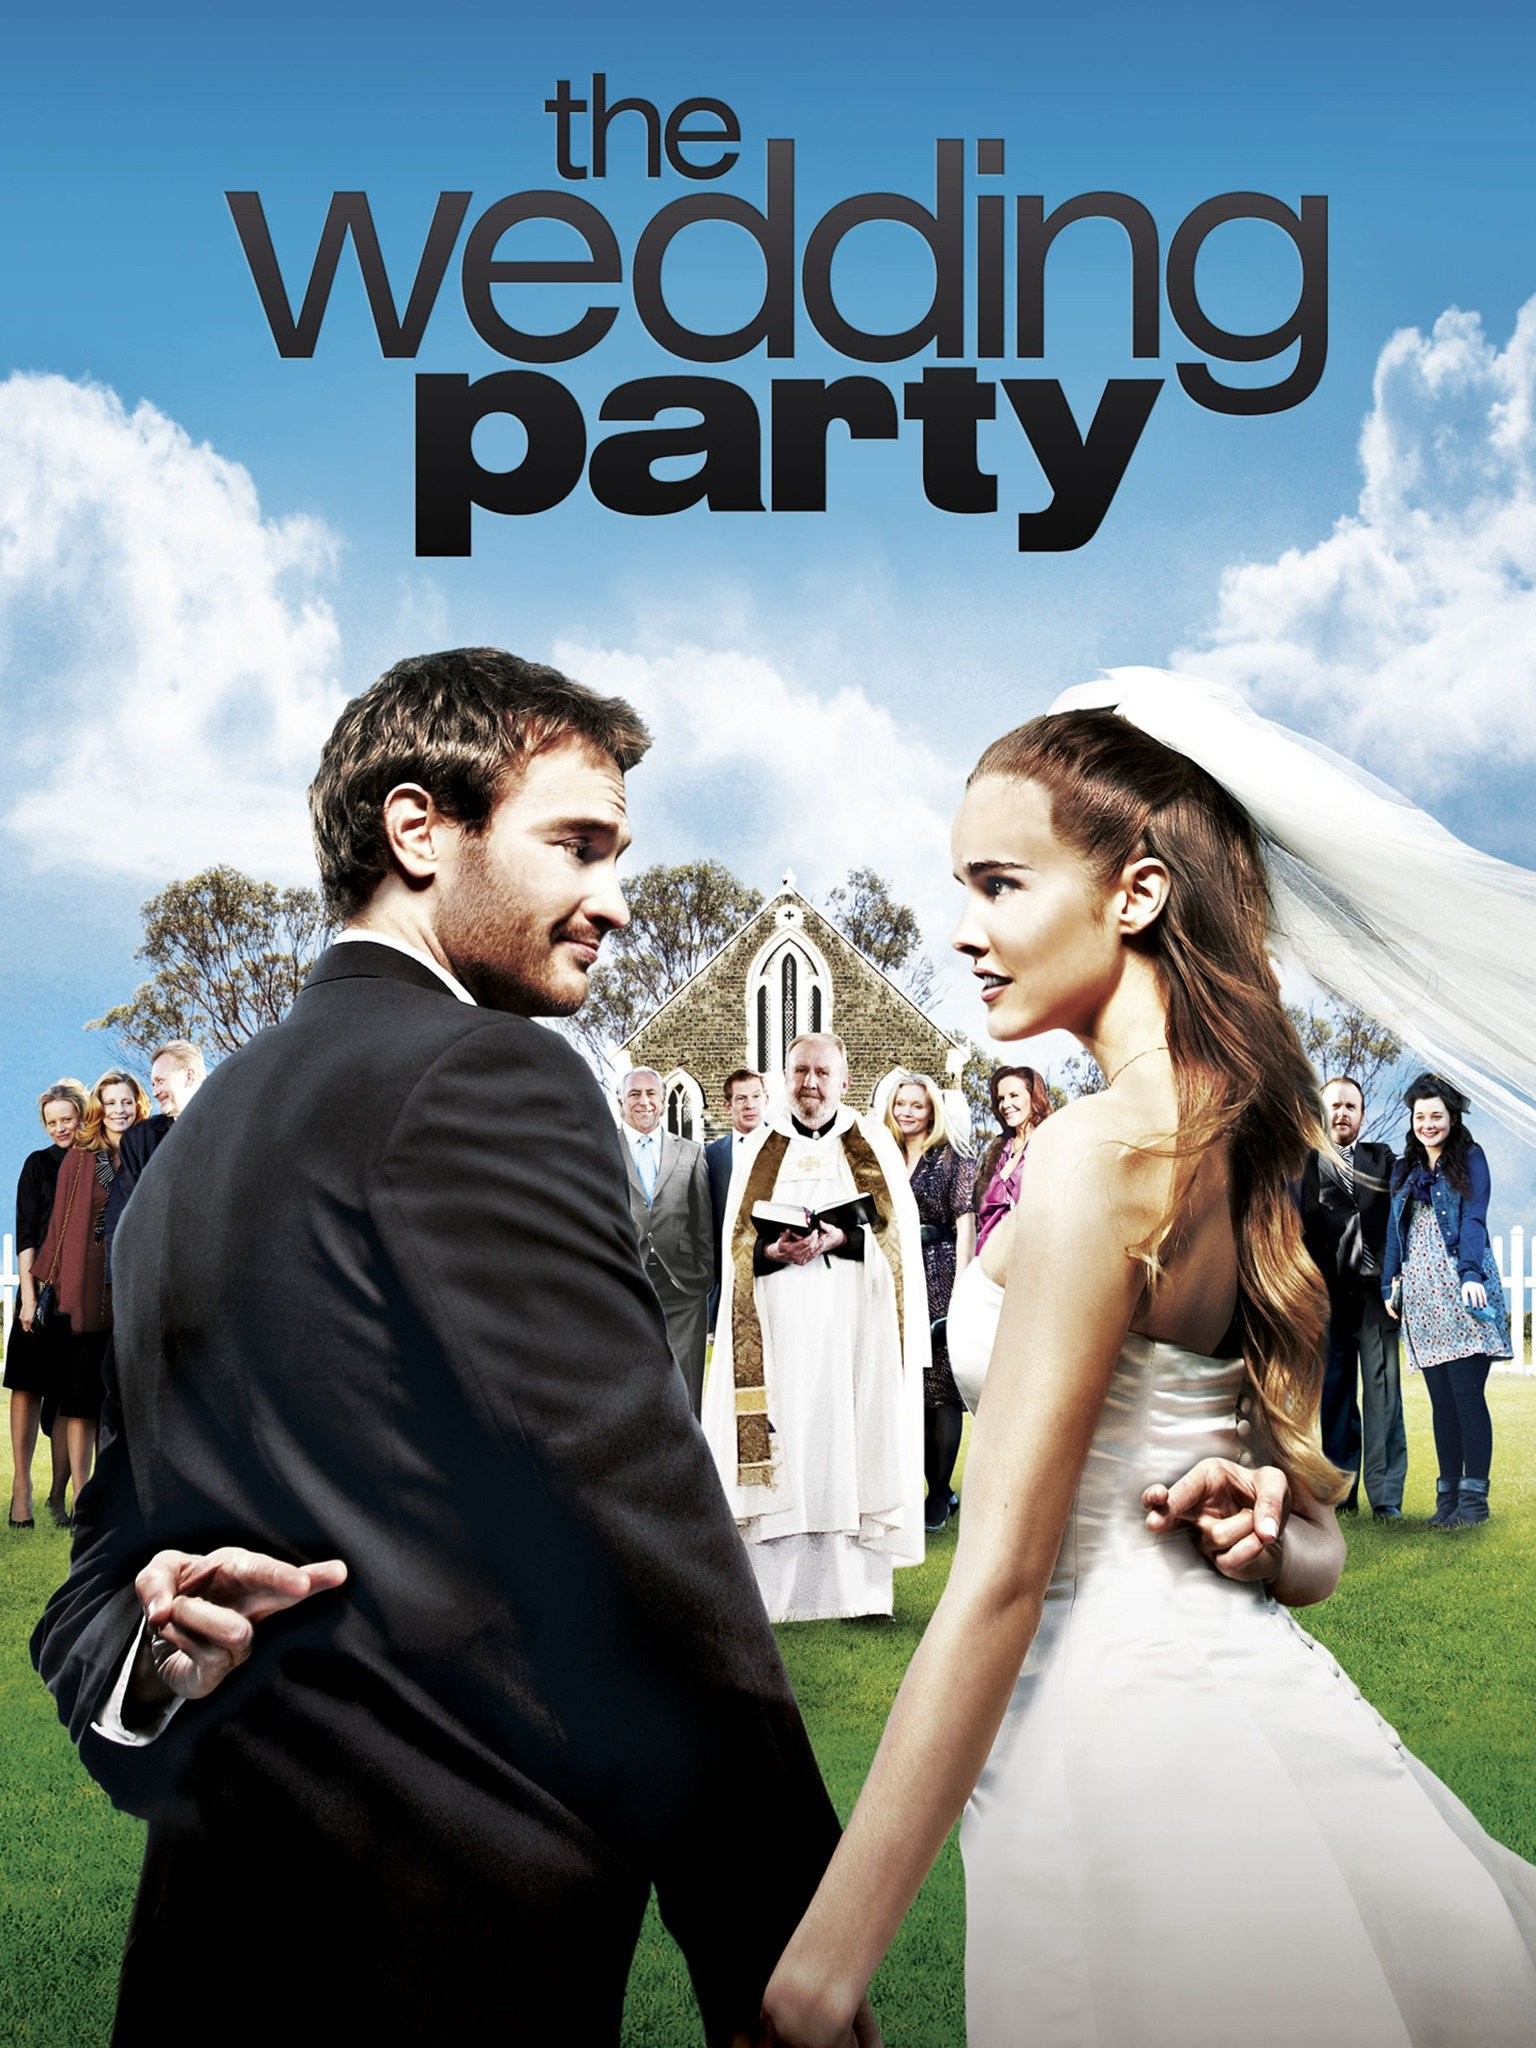 Bigger Party, Crazier Drama! Watch Official Trailer for The Wedding Party  2